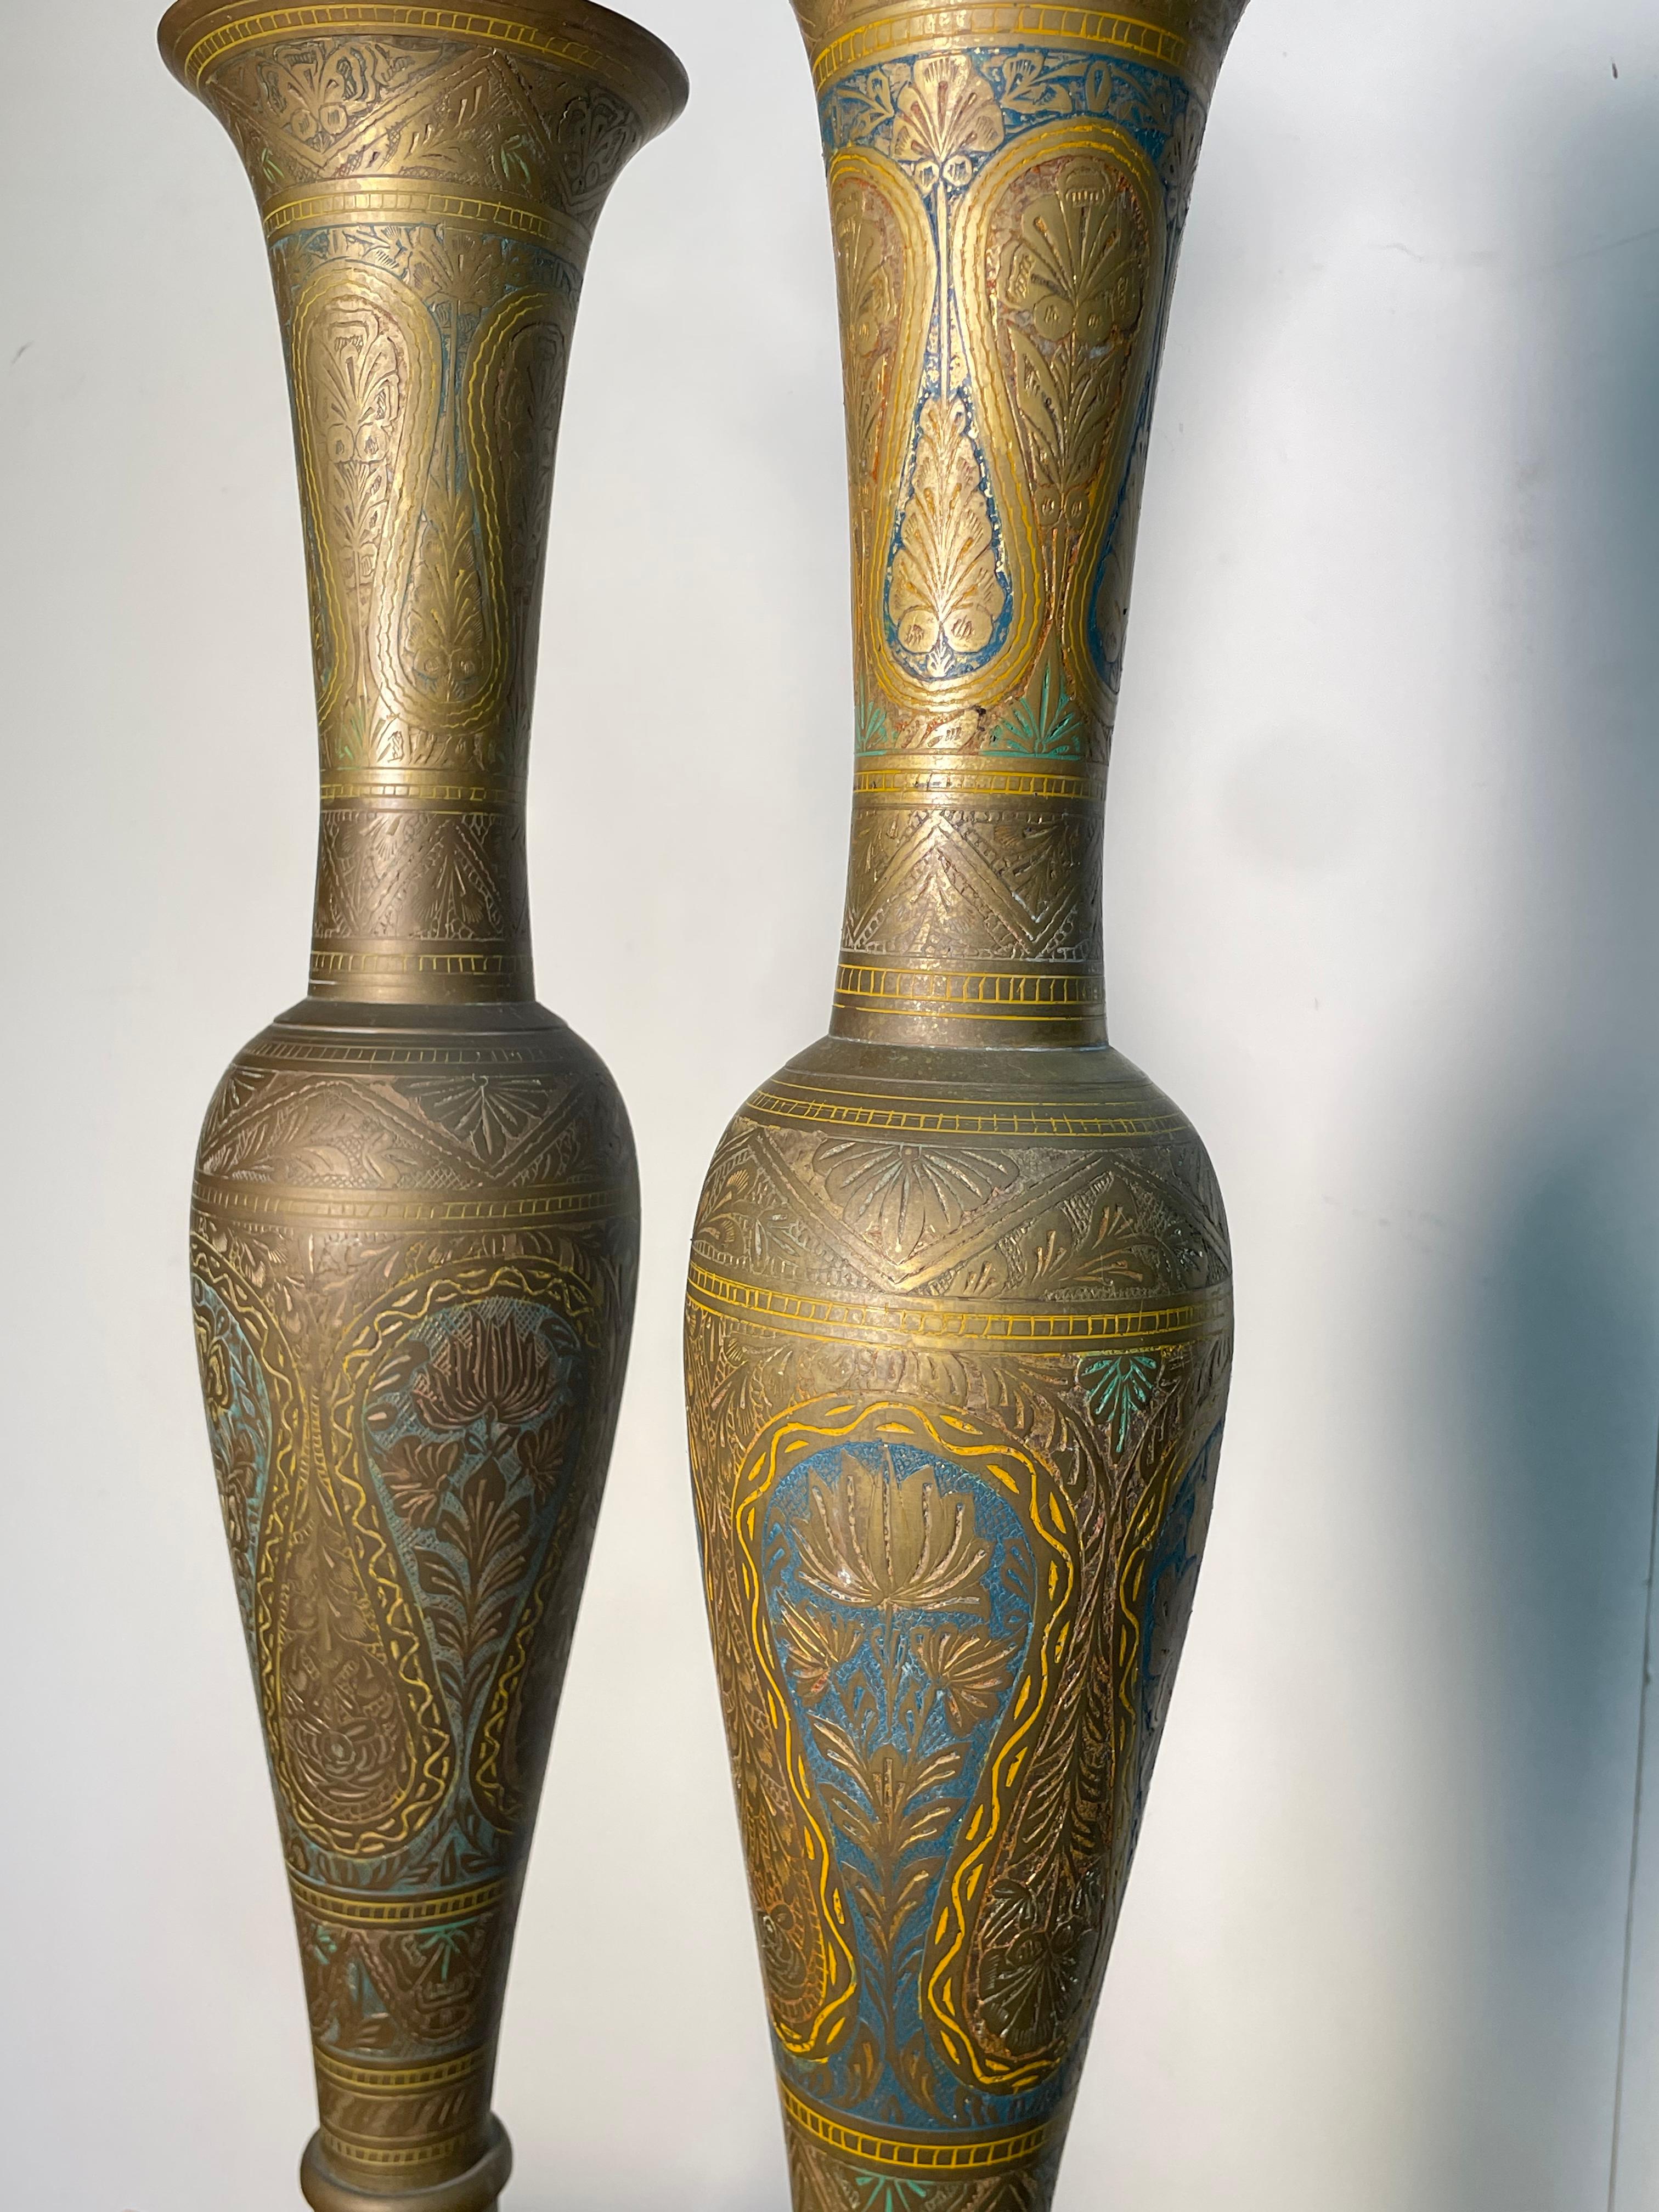 Moroccan 2 Piece Brass Irons made in the 19th Century with beautiful embellishments of teal, yellow, blue, and red. The colors have faded over the centuries, but it still has immaculate beauty and saturation to it. The pieces really speak for